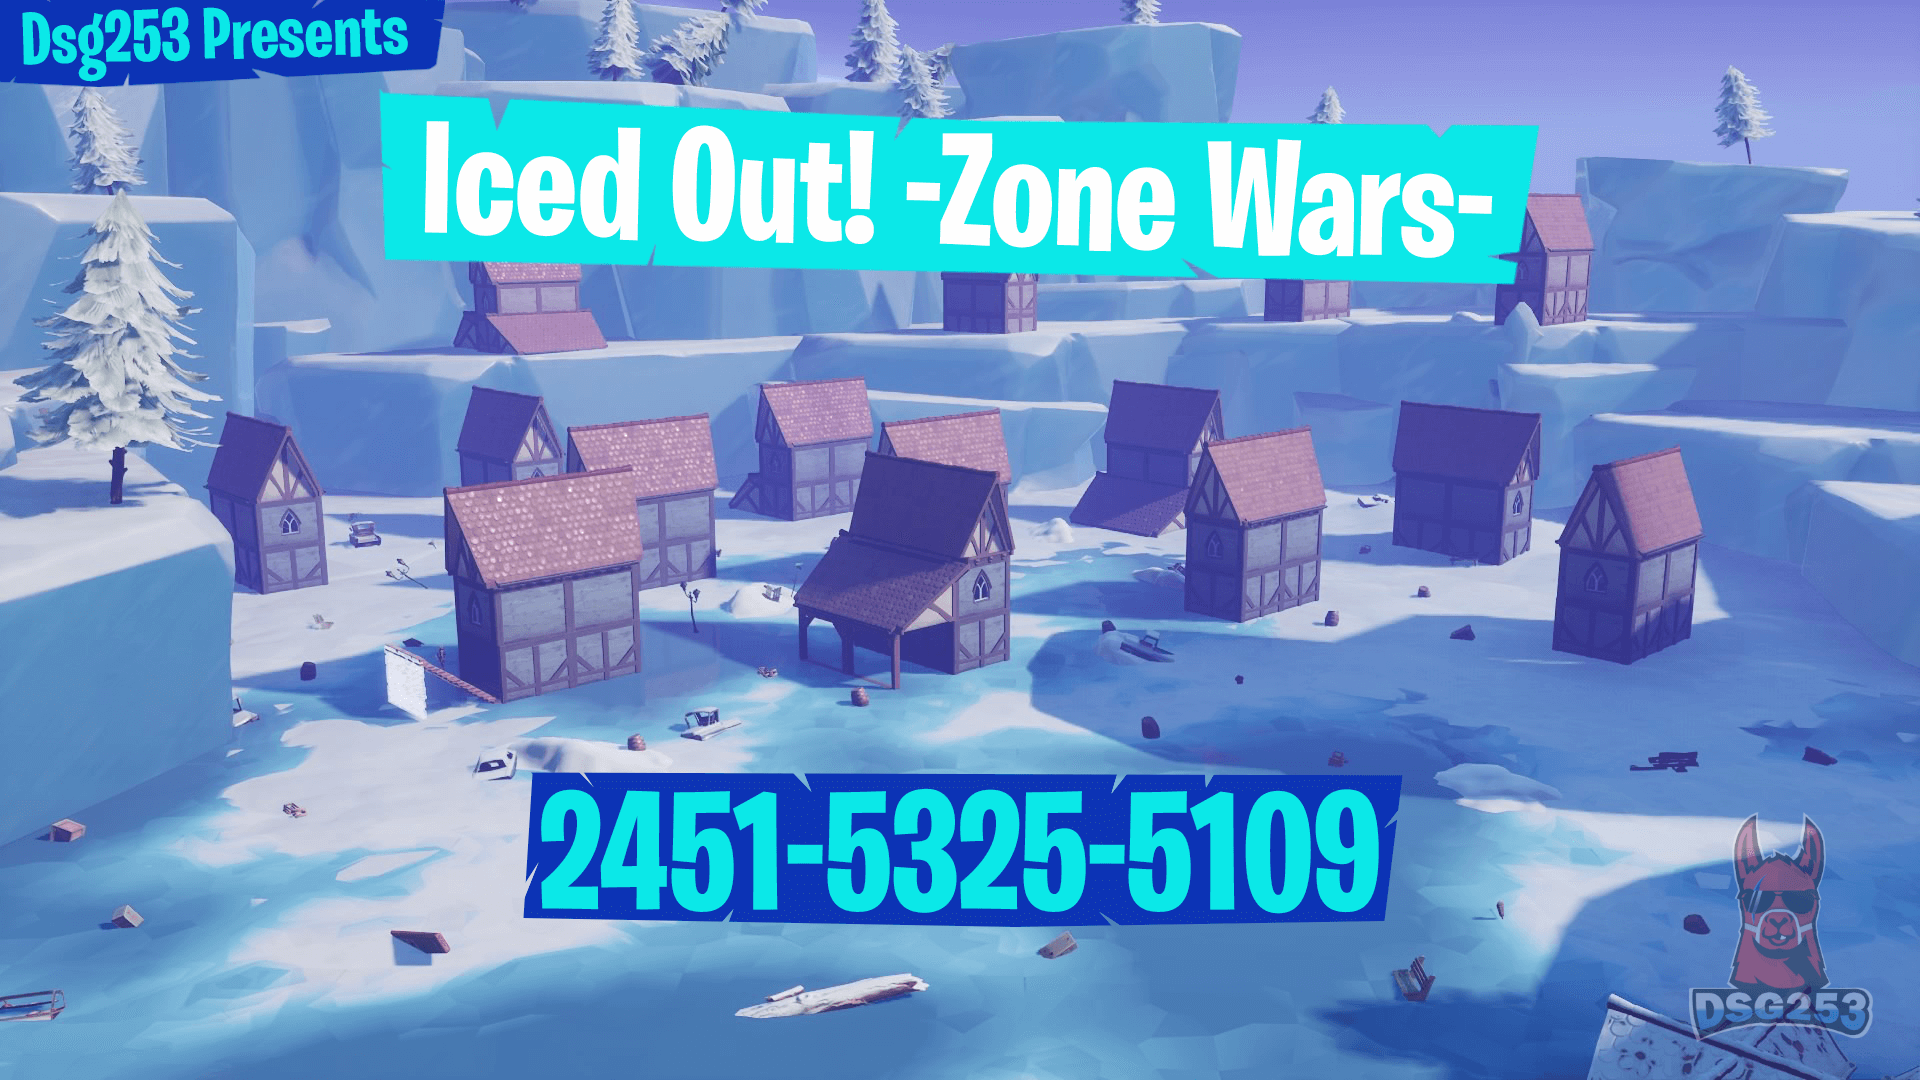 ICED OUT! -ZONE WARS- BY DSG253 image 3